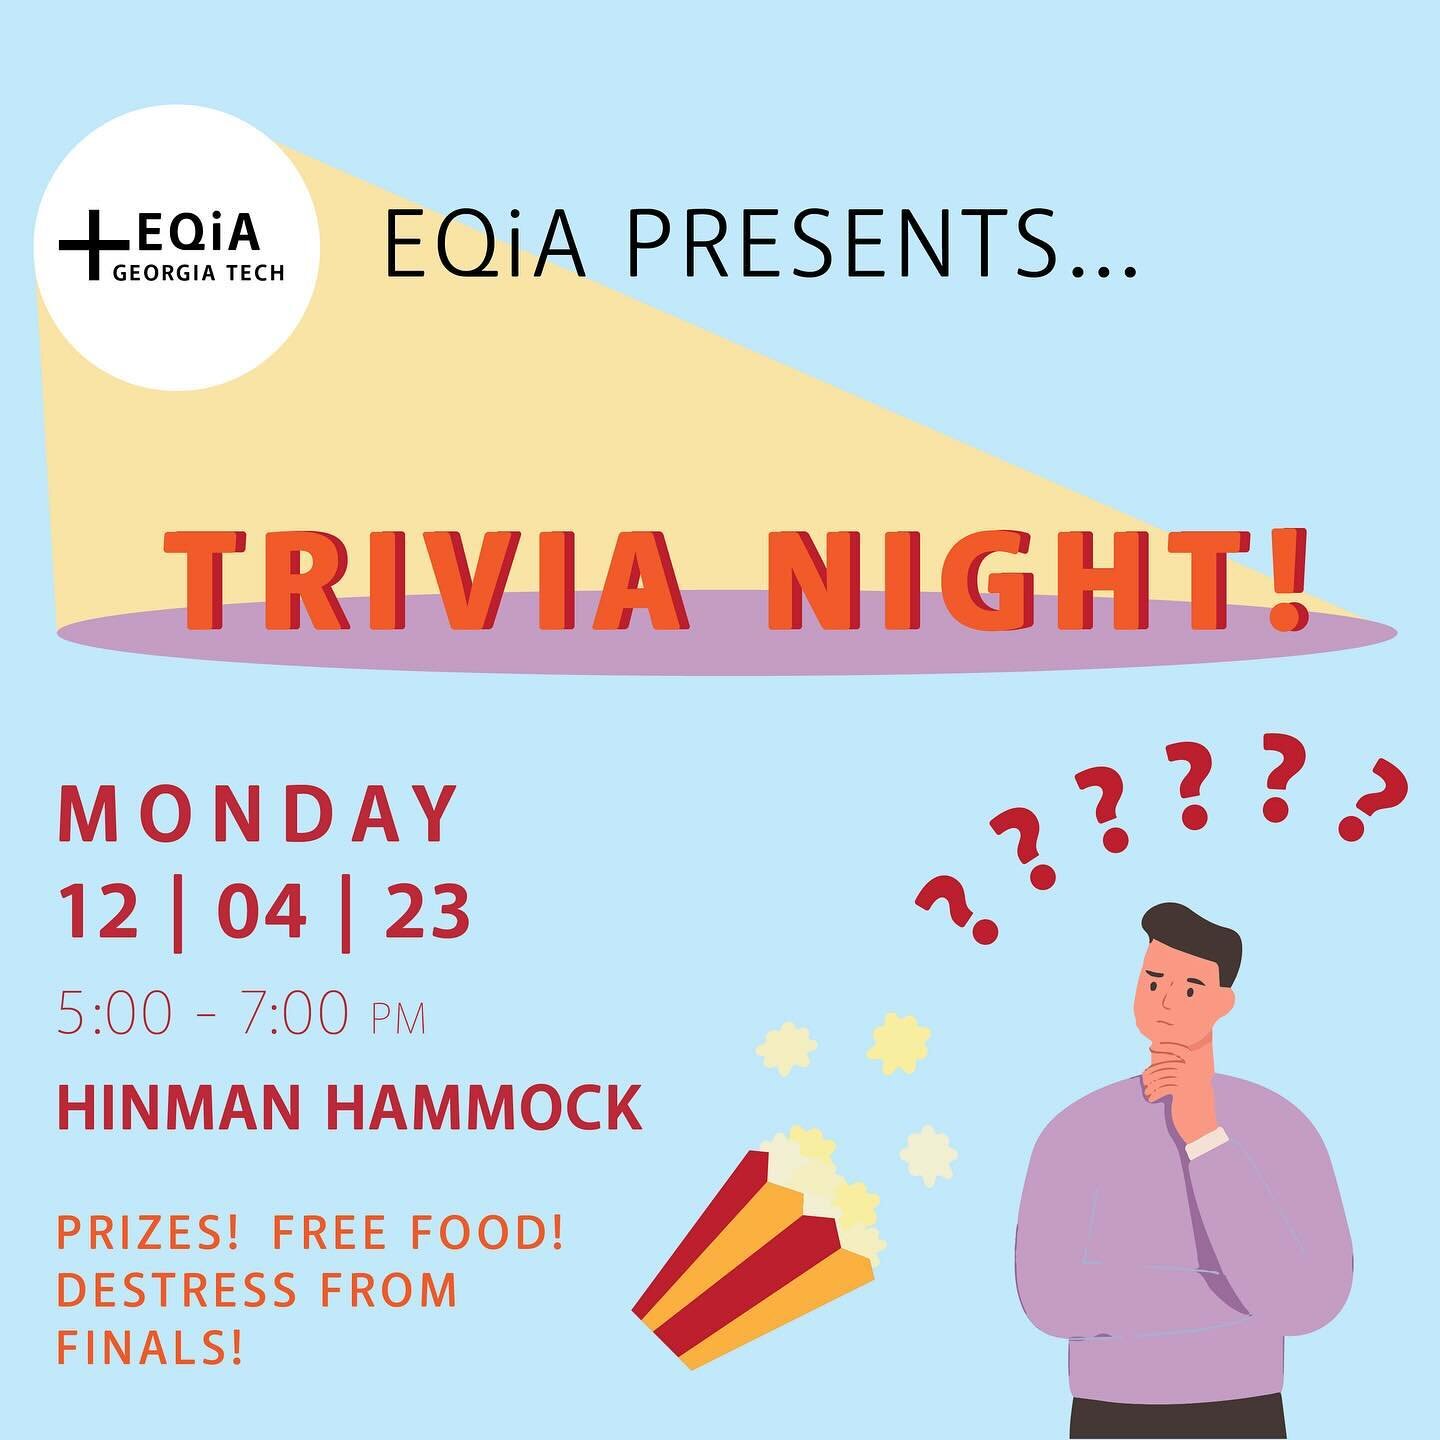 Join us for Trivia Night to celebrate the end of Final Reviews and take a break before final exams! 
We&rsquo;ll be in the Hinman hammock with fun games and good food!